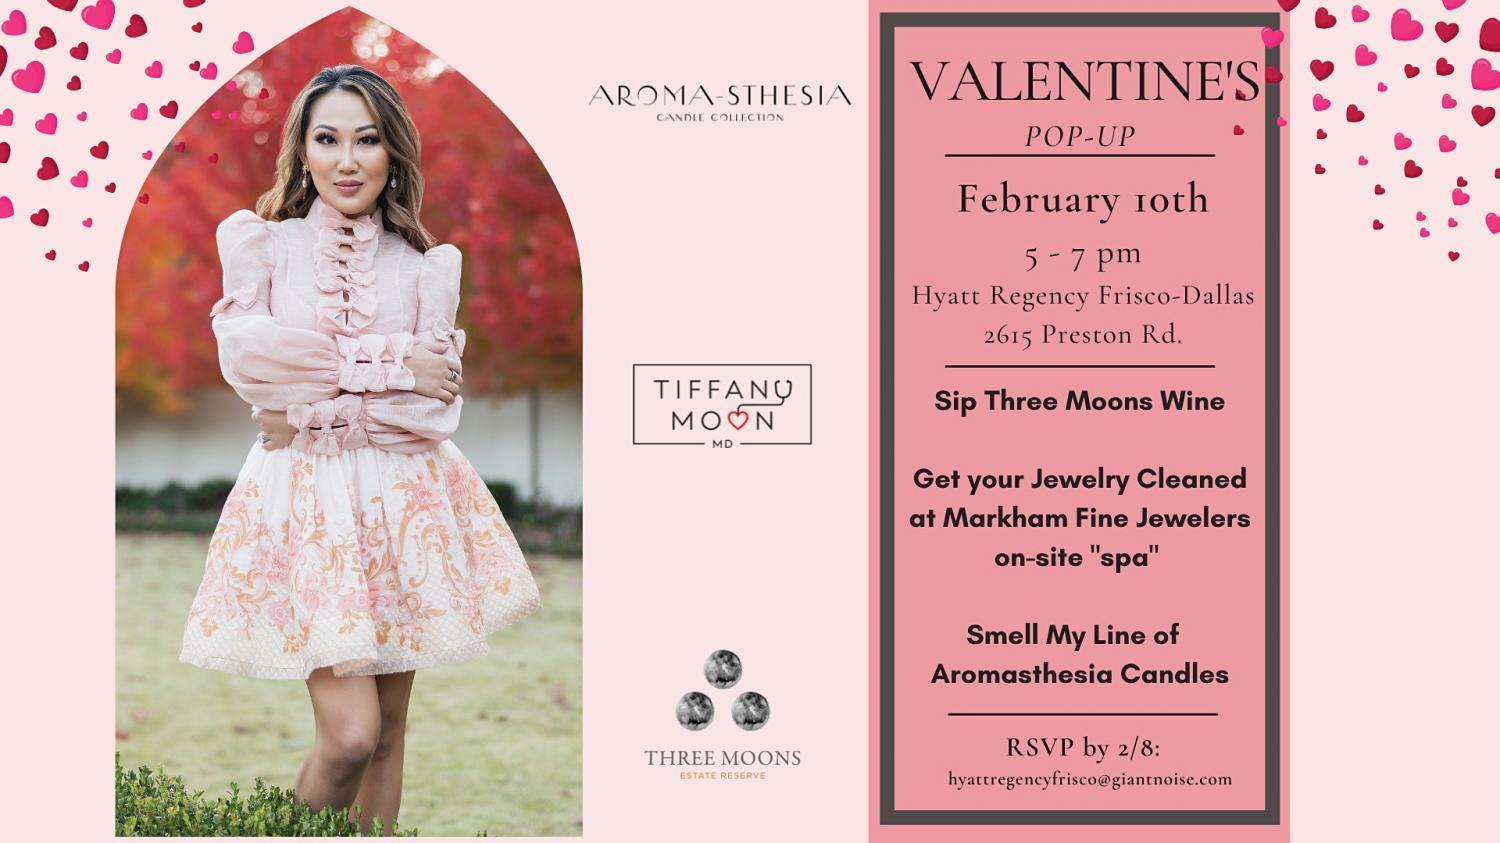 VALENTINE'S DAY POP-UP WITH TIFFANY MOON